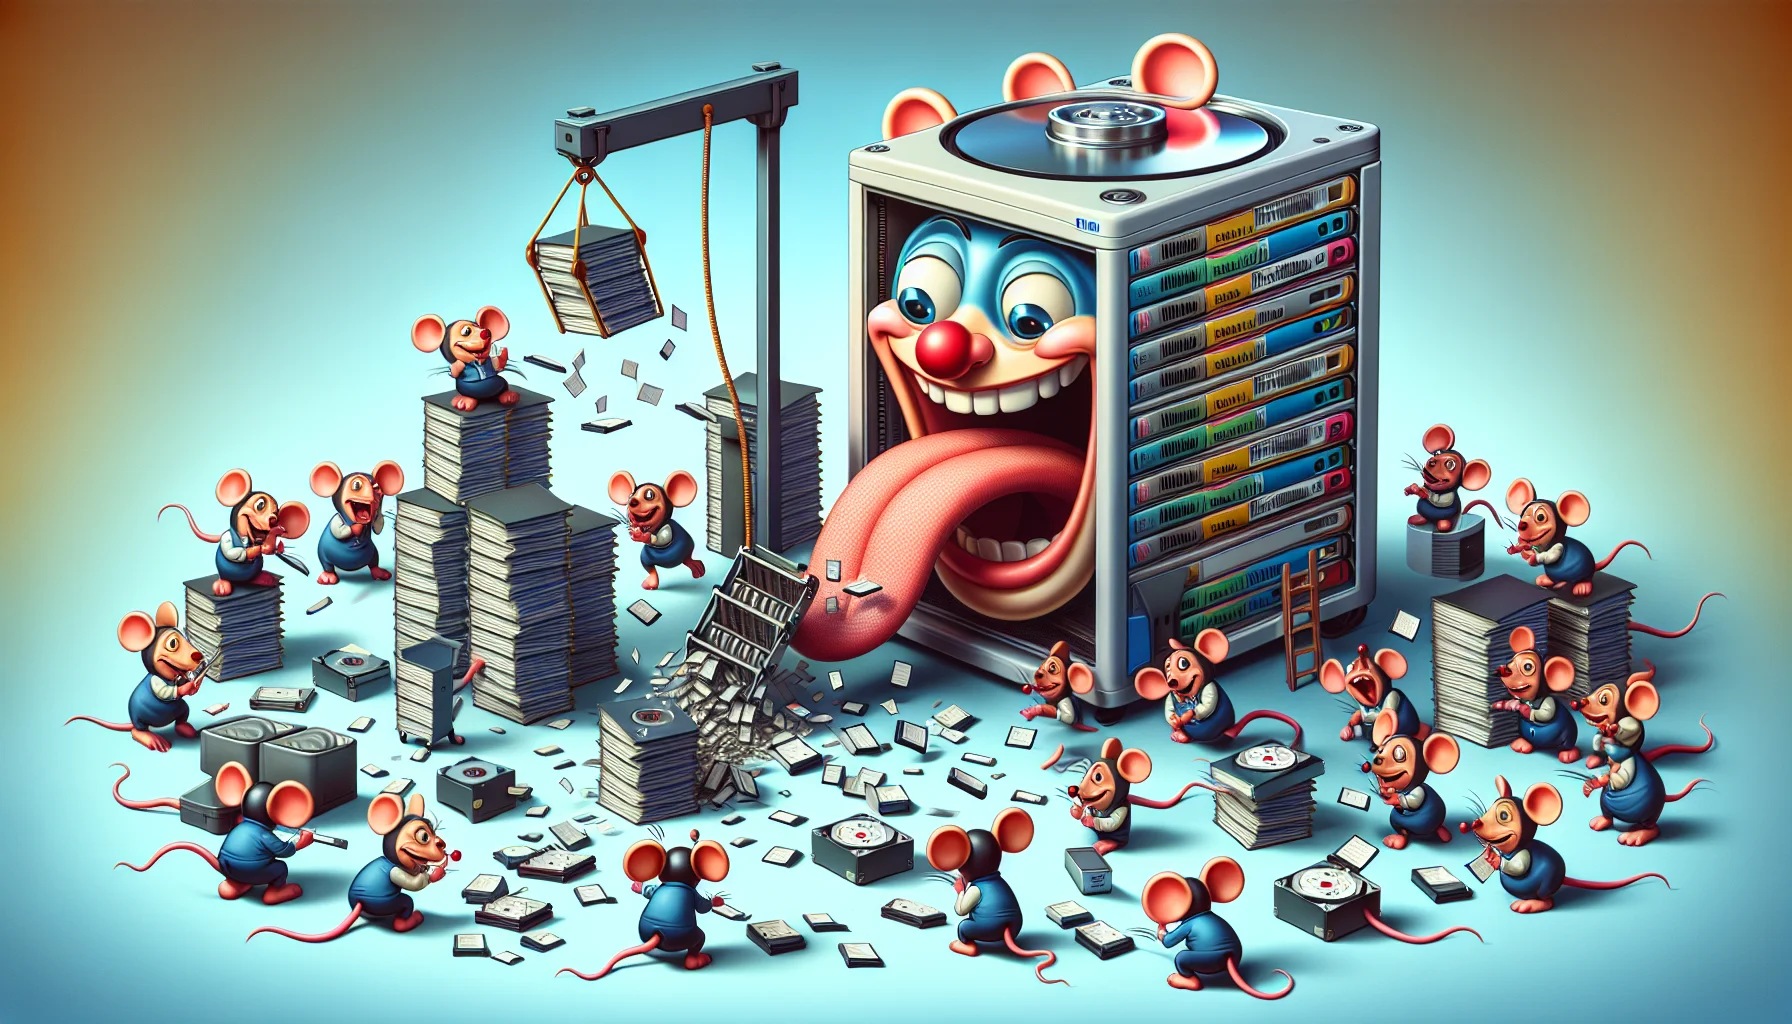 Create a detailed and realistic image of a humorous scenario related to web hosting. A whimsically styled computer server, resembling a cheeky, animated character, is tediously organizing stacks of files that symbolize data. Nearby, a team of stylized computer mice, depicted as a diverse group of web technicians of various descents and genders, are busily providing managed backup services. They're using a giant, comical pendulum-style hard drive swing to launch bits and pieces of data, one by one, into the server's open mouth. This entire spectacle should evoke playful laughter and yet also emphasize the meticulous attention dedicated to backup processes in web hosting environments.